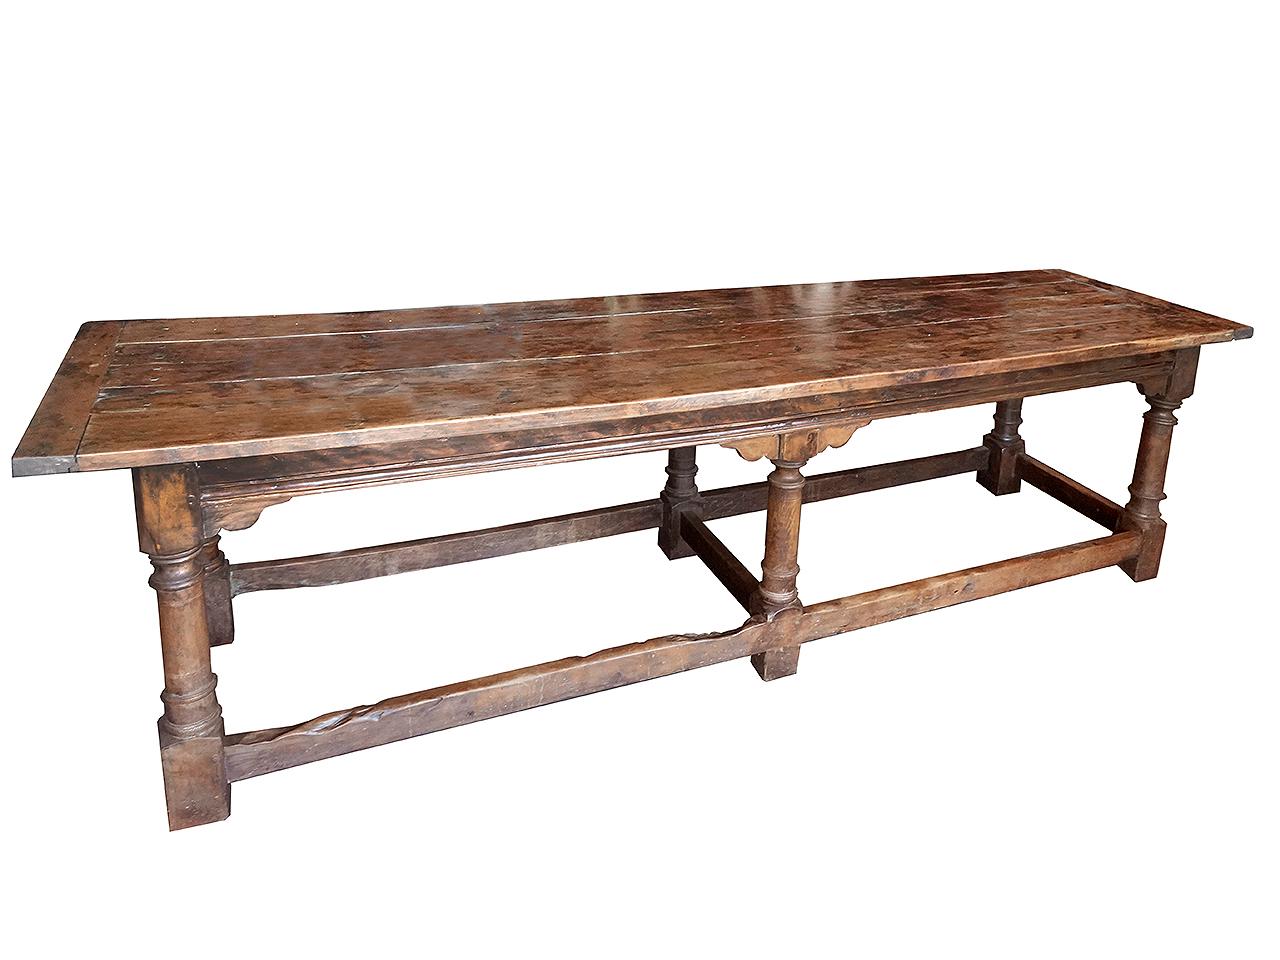 The table is three-plank and raised on six baluster supports united by stretchers. The rails on all four sides are simple in design and works equally in a traditional or modern setting. It is well over 9 foot long and very impressive. I am not sure